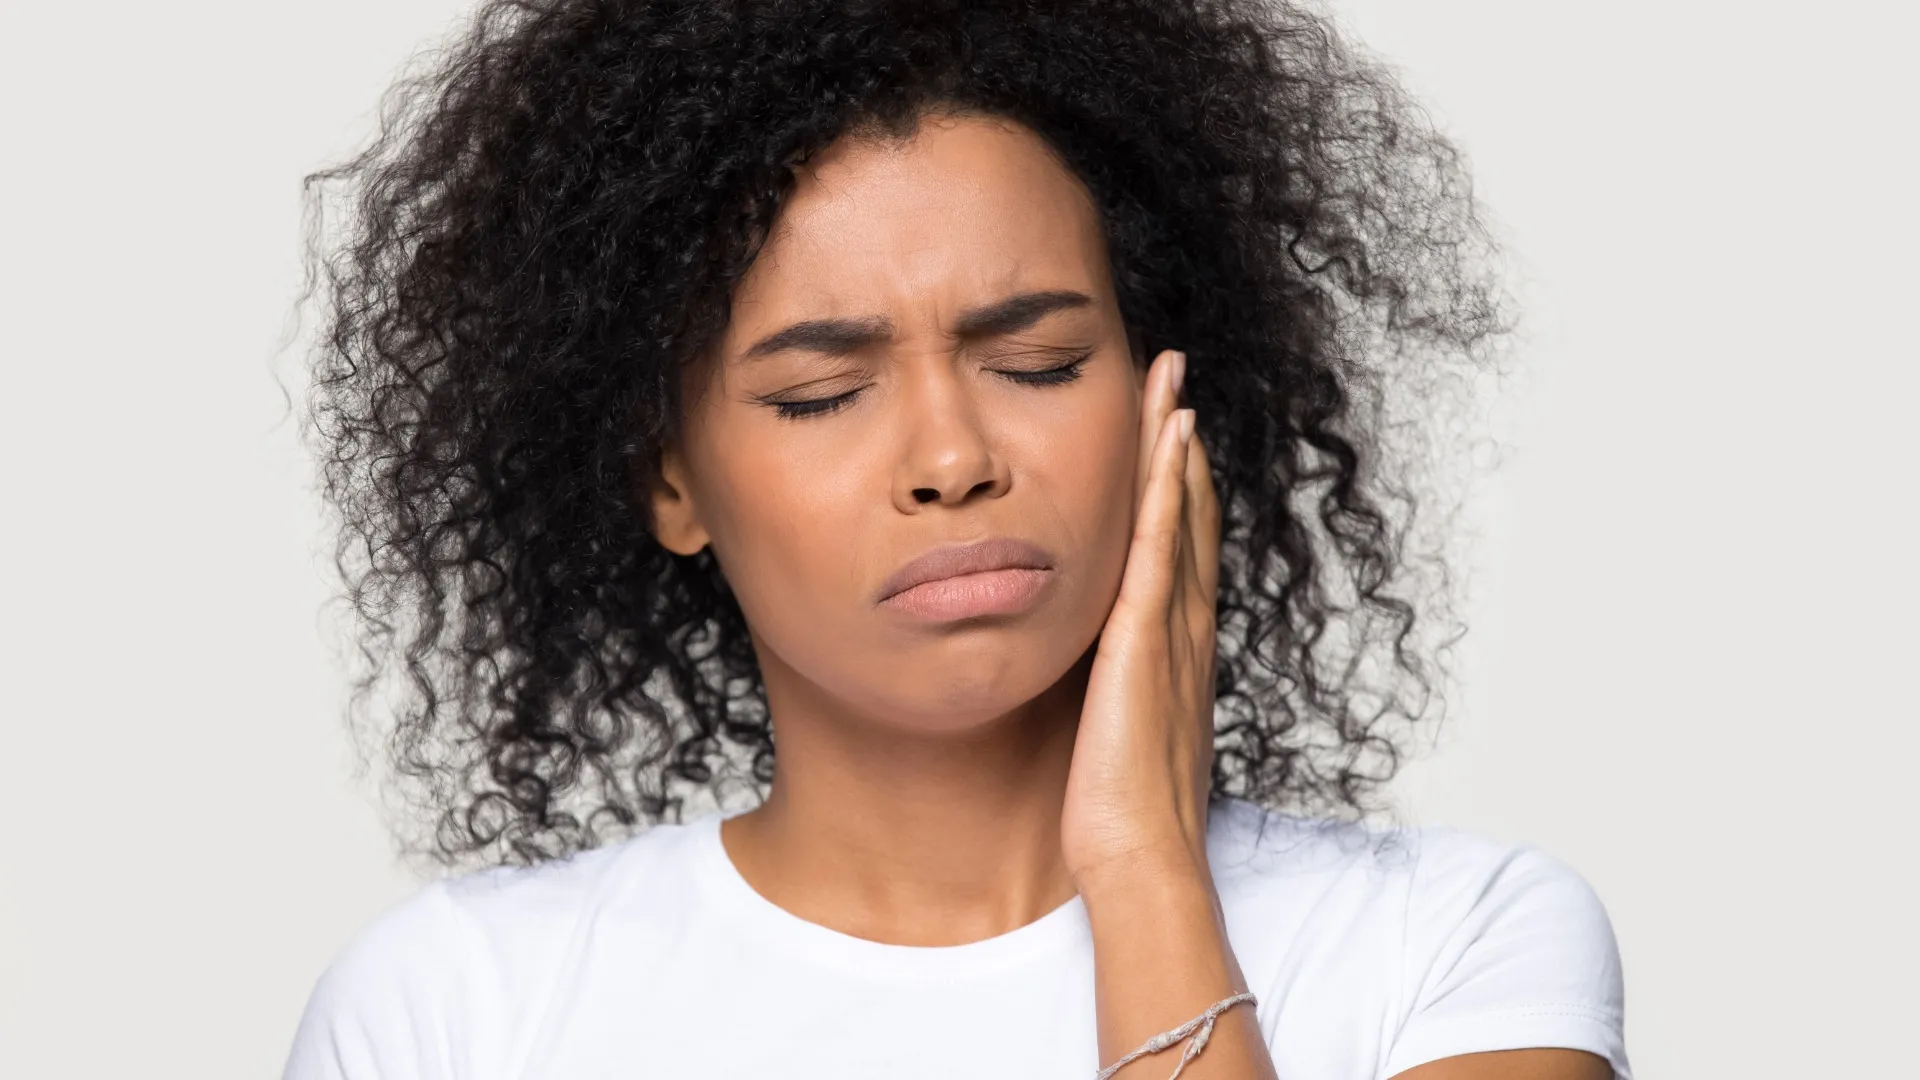 TMJ Disorder: It May Go Beyond Clenching Your Teeth